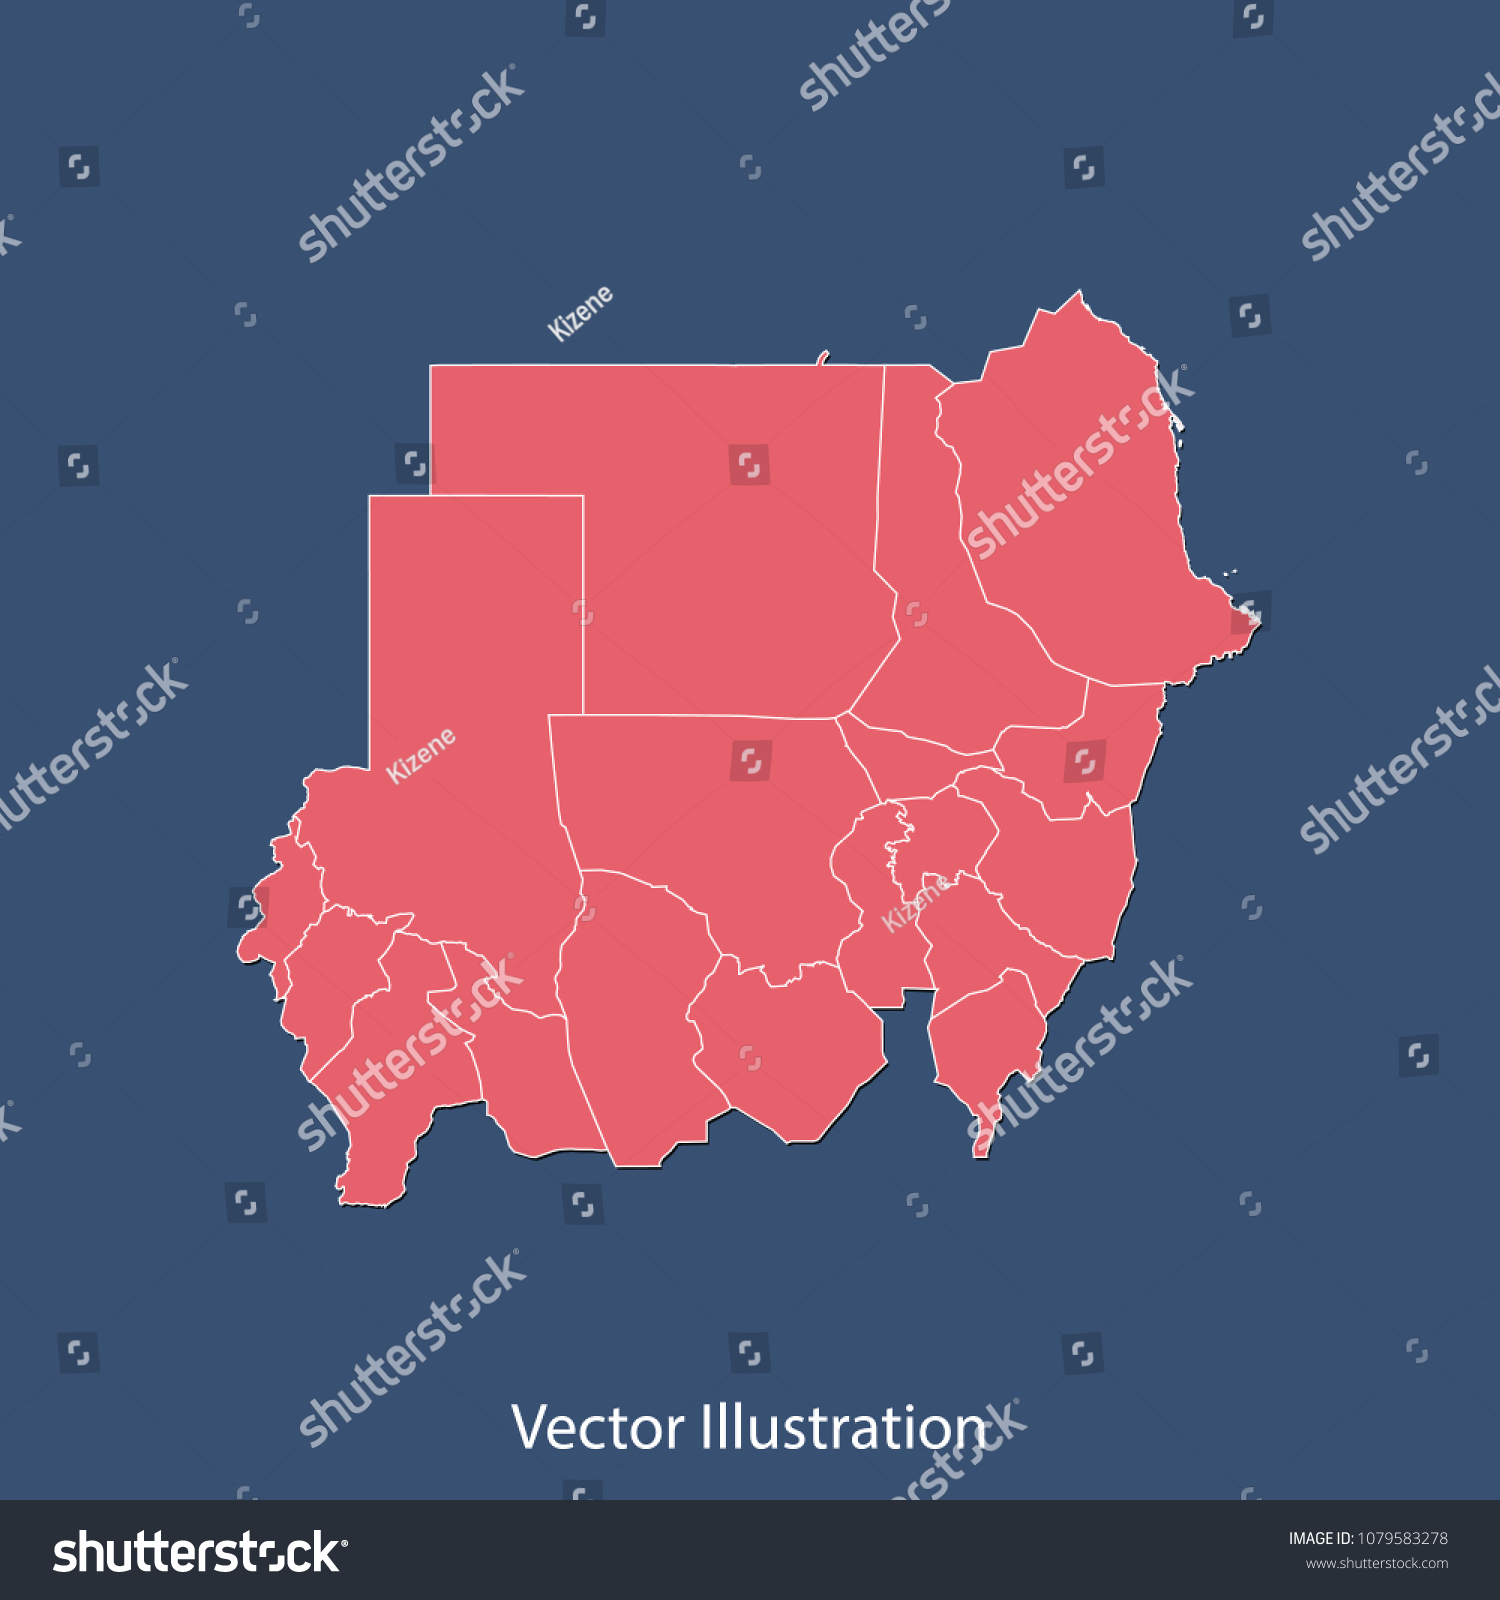 Sudan map - High detailed color map of Sudan. flat design style, clean and modern. Vector illustration eps 10 #1079583278